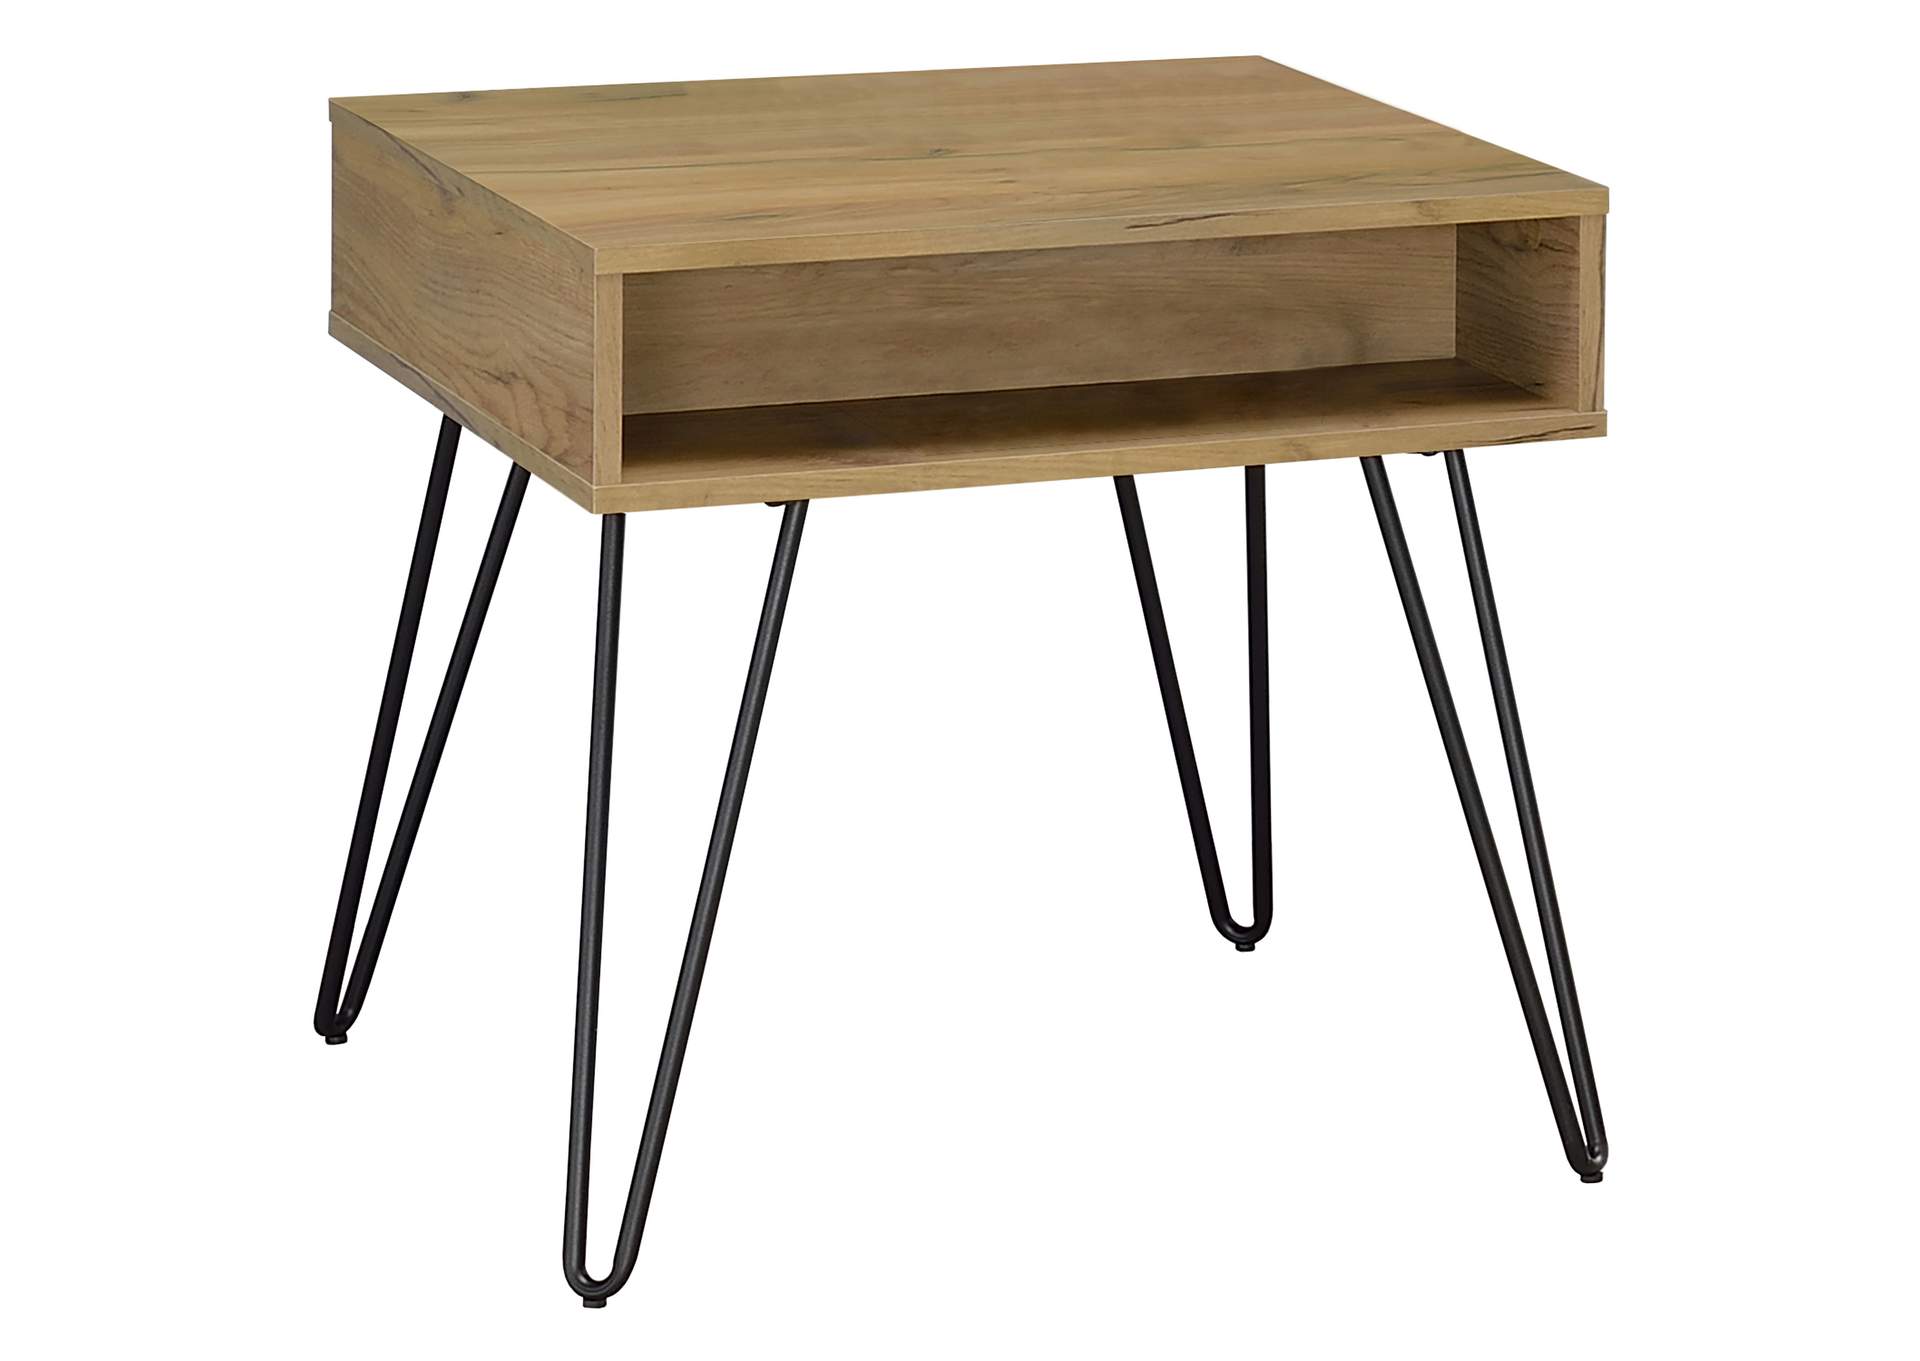 Fanning Square End Table with Open Compartment Golden Oak and Black,Coaster Furniture